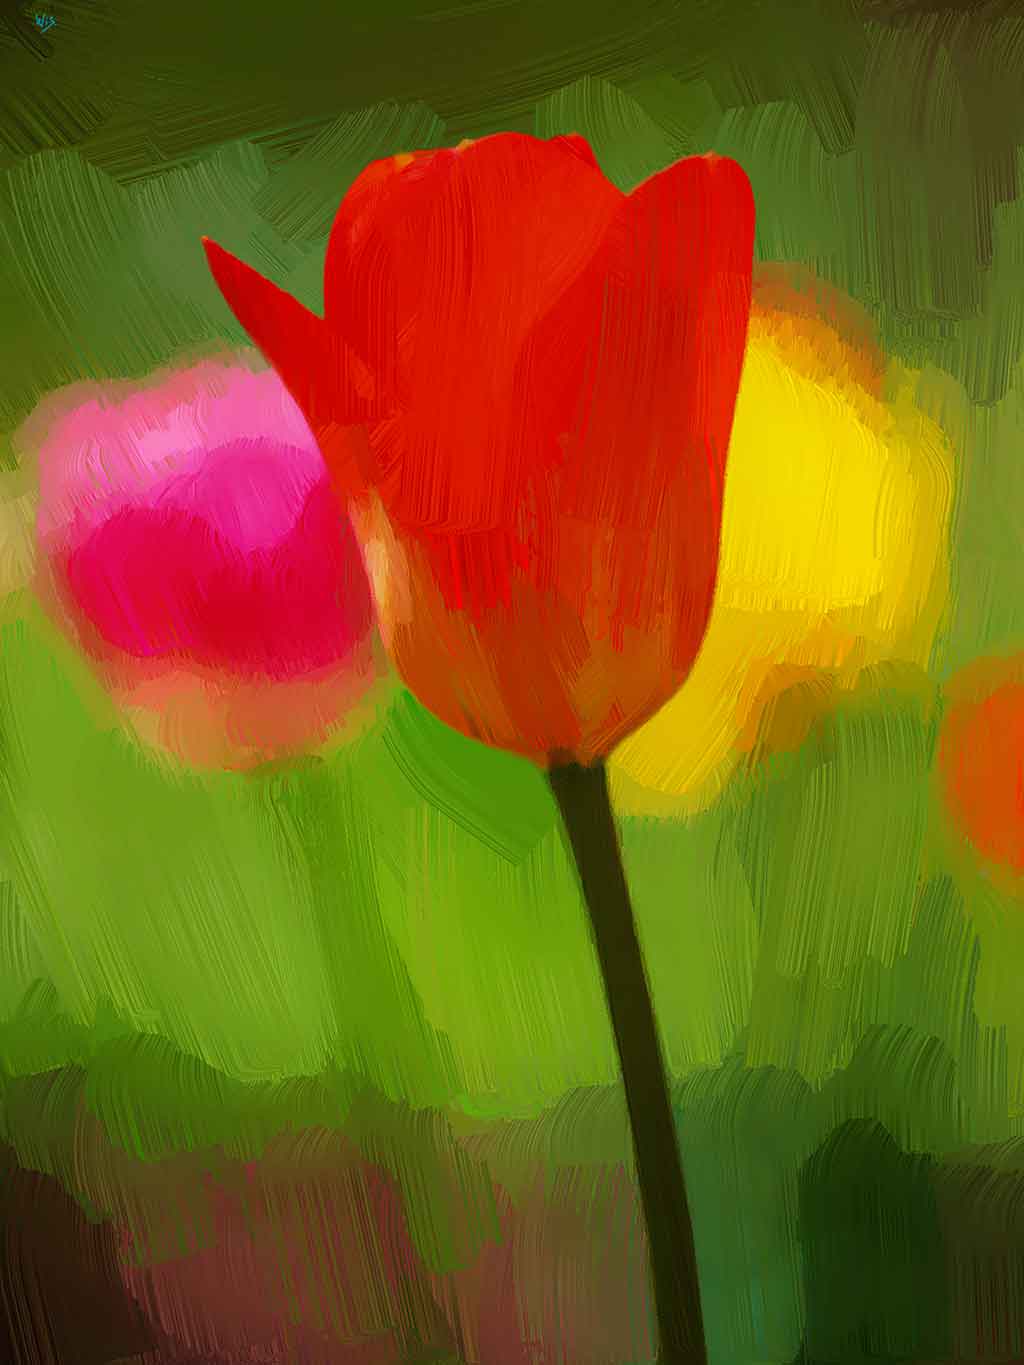 Red and pink tulips, yellow sun painted on a freely green background; on art canvas print.